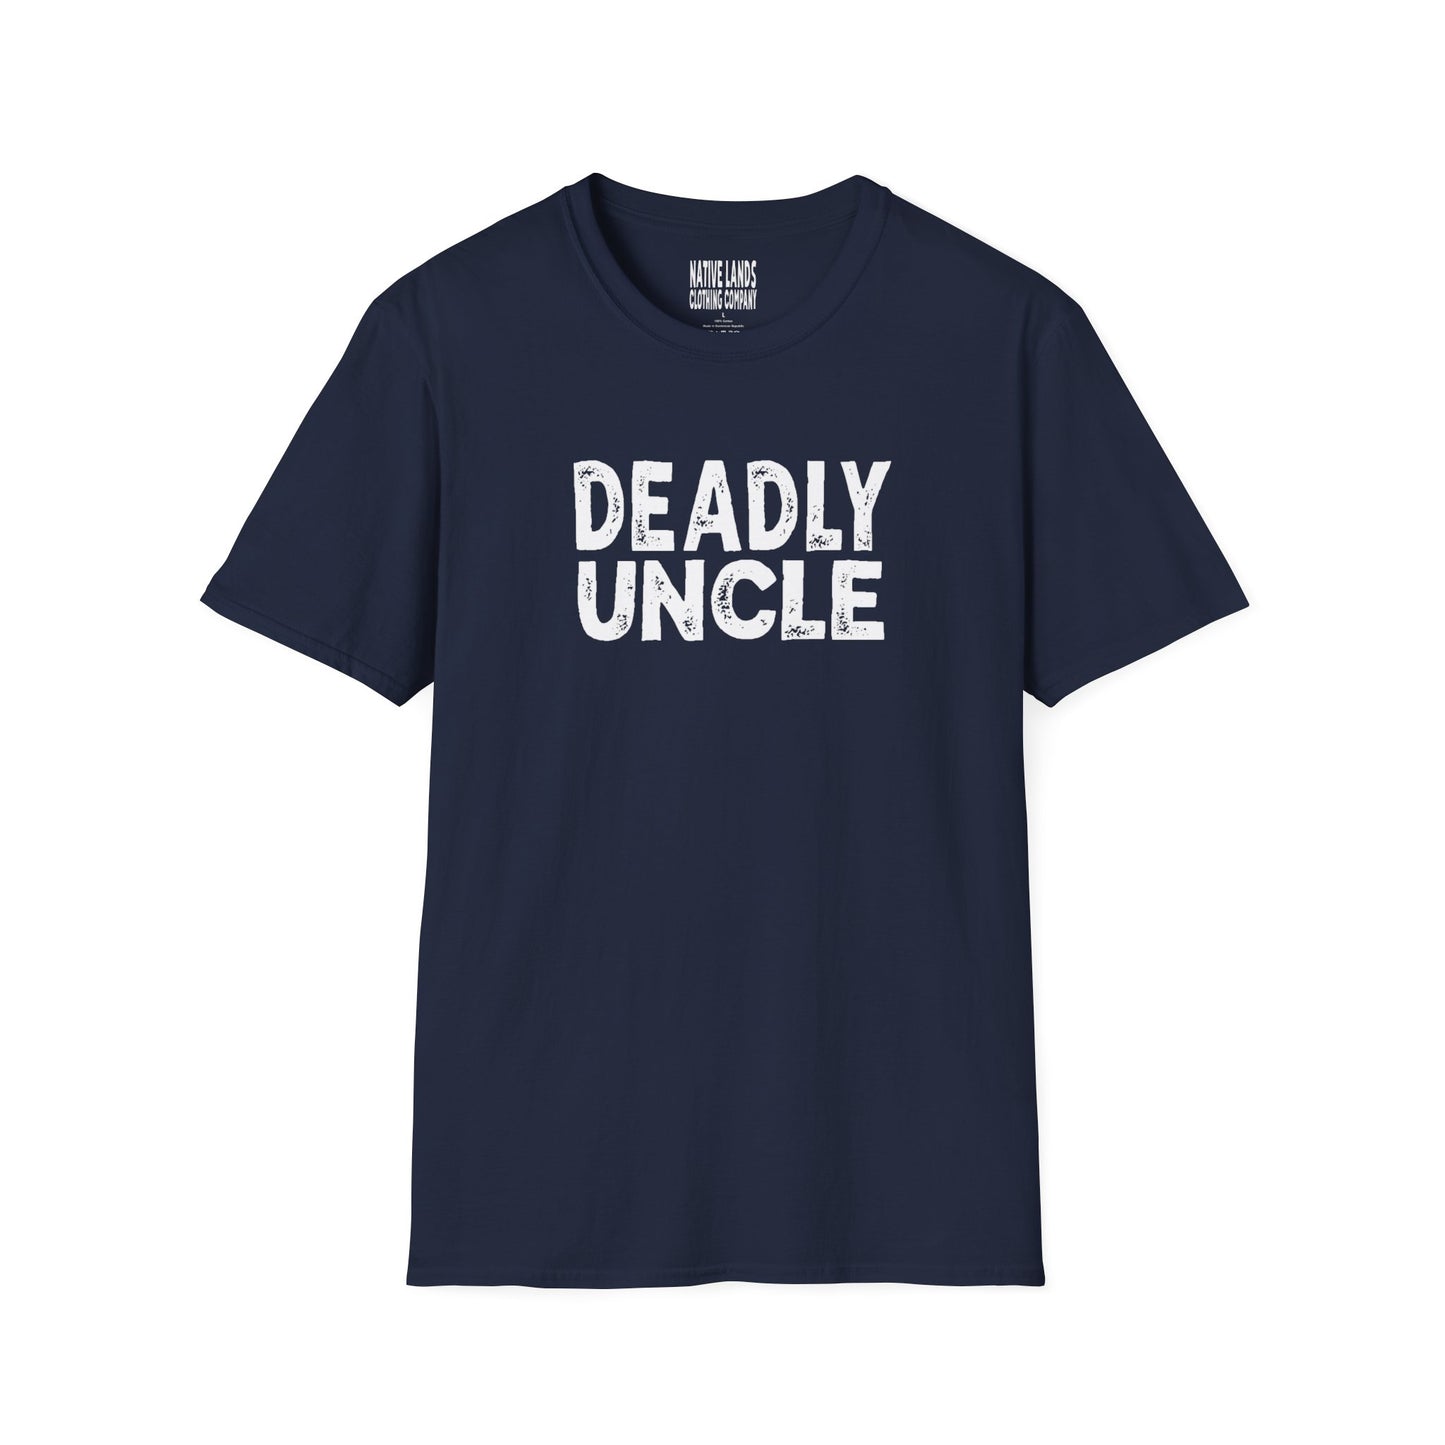 Deadly Uncle シャツ コットン ネイティブ アメリカン - グランジ